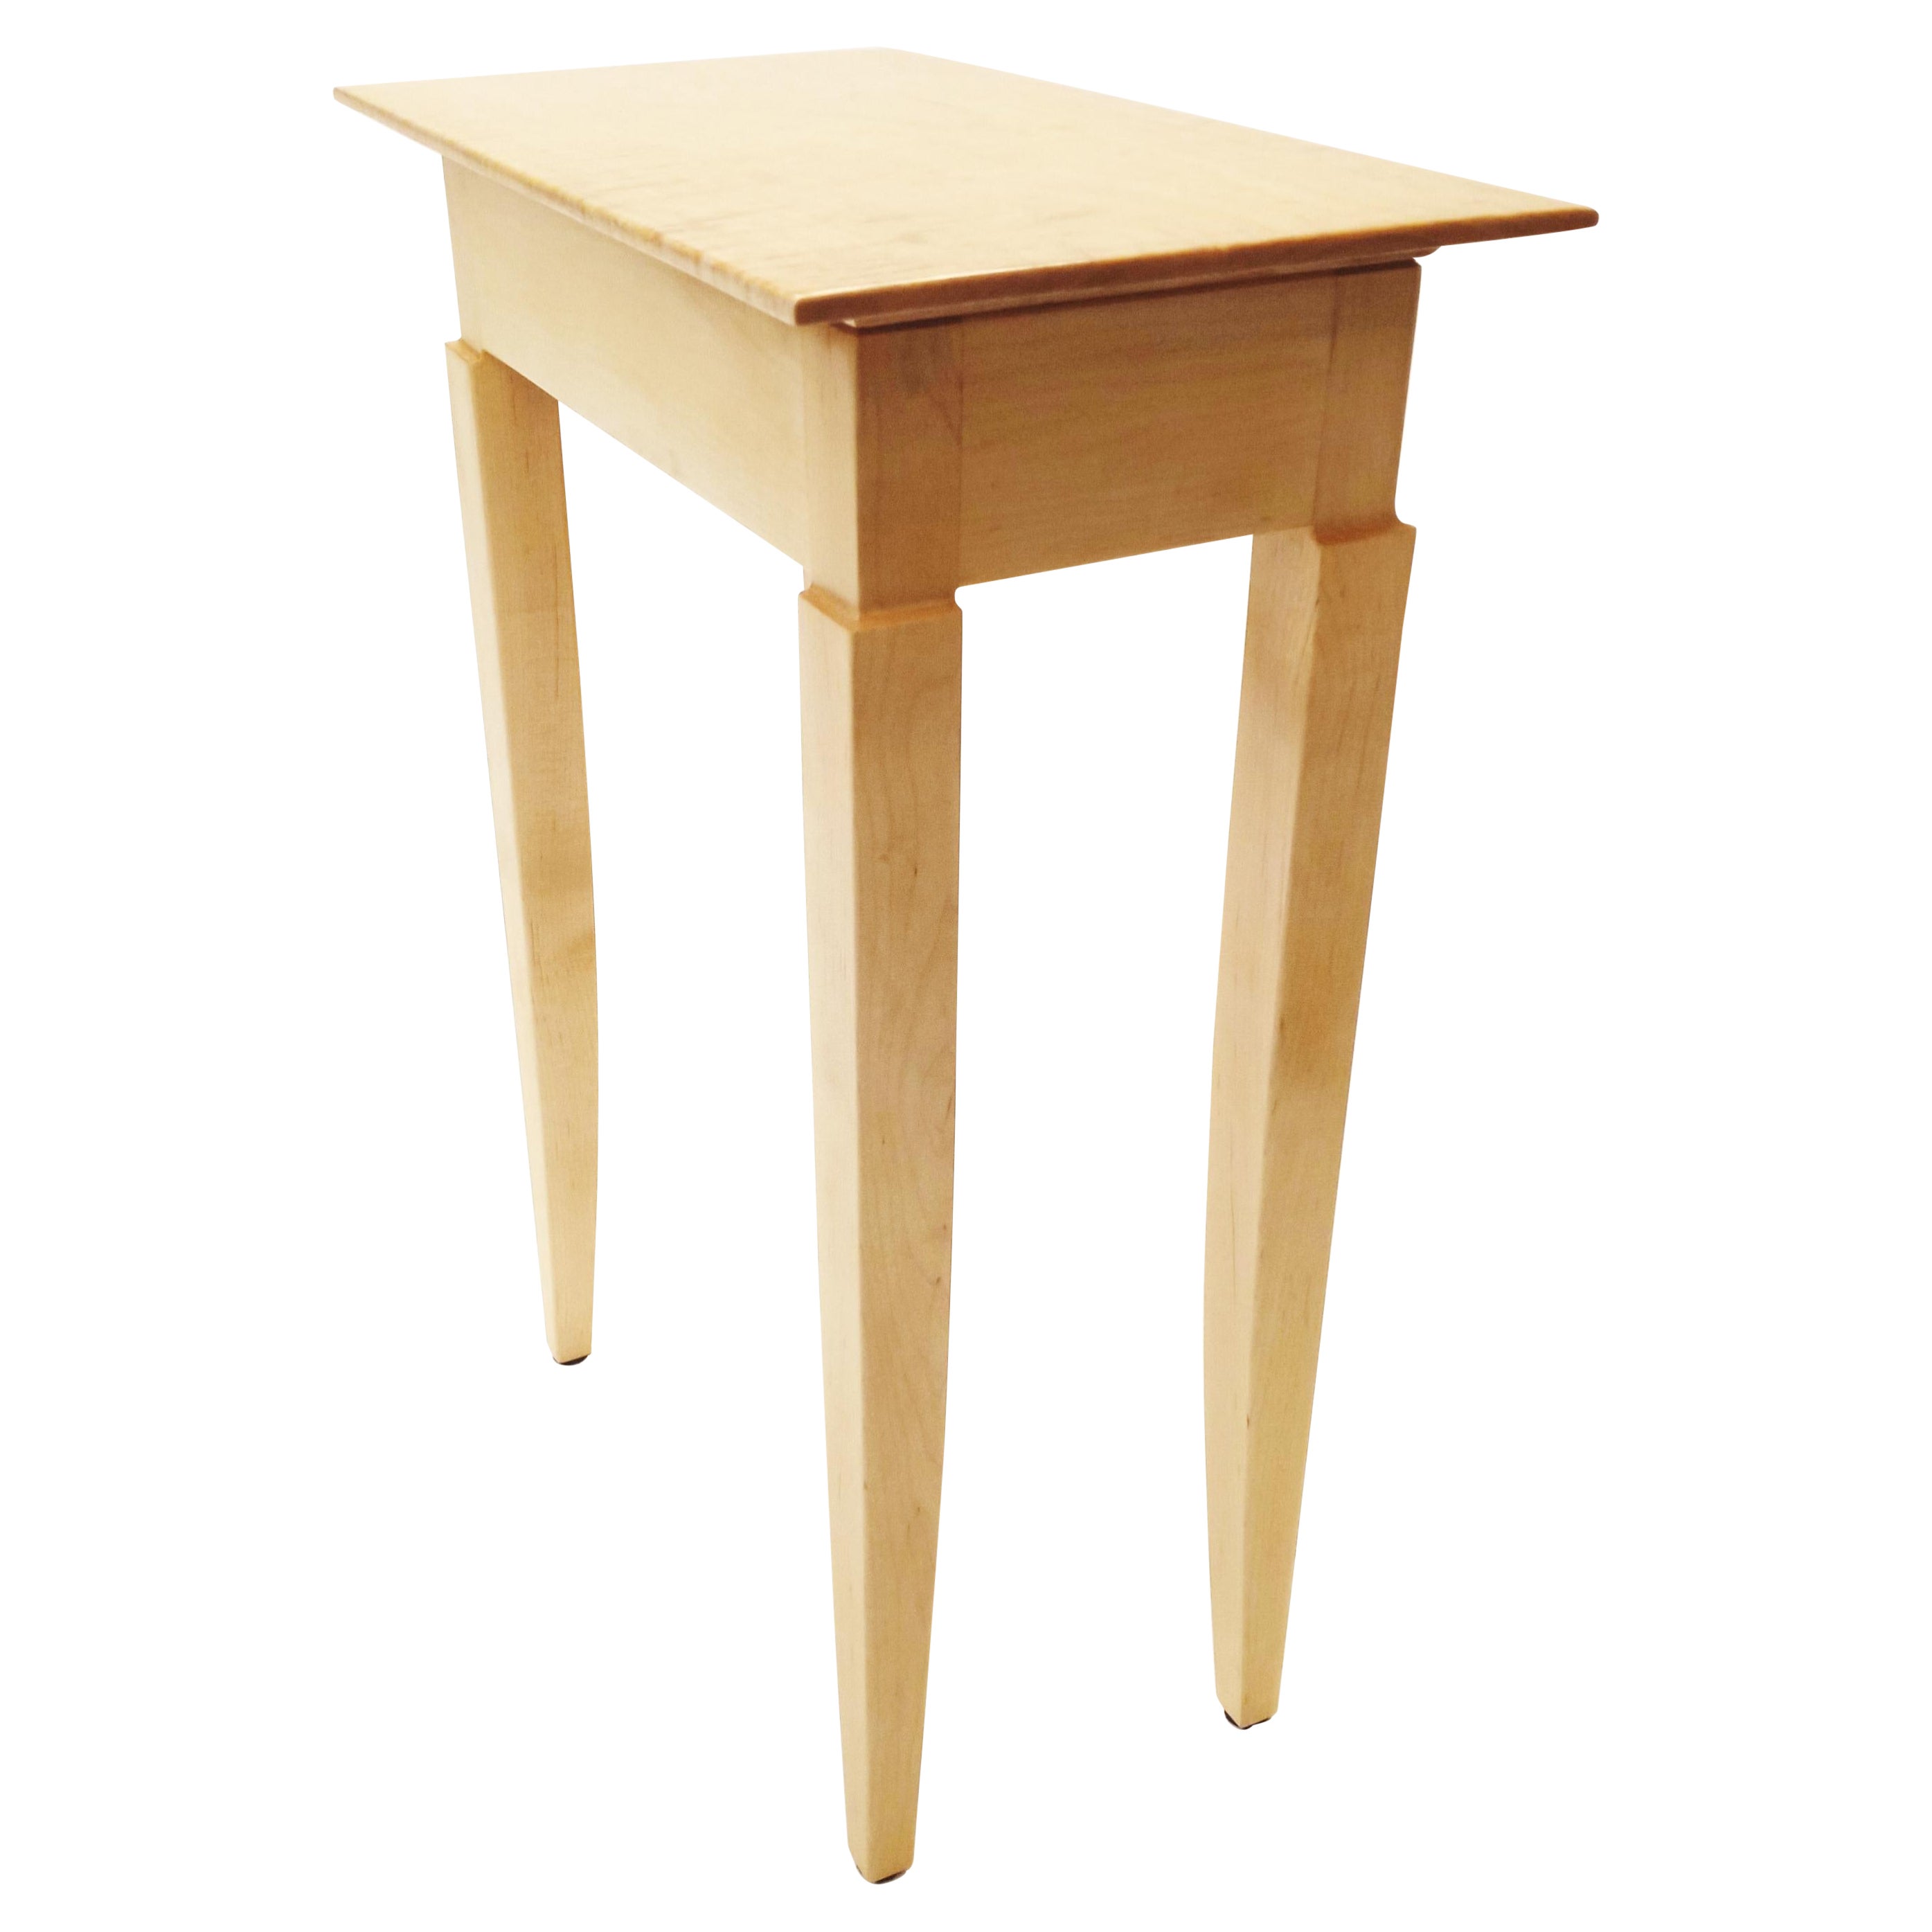 Curly Maple Side Table A